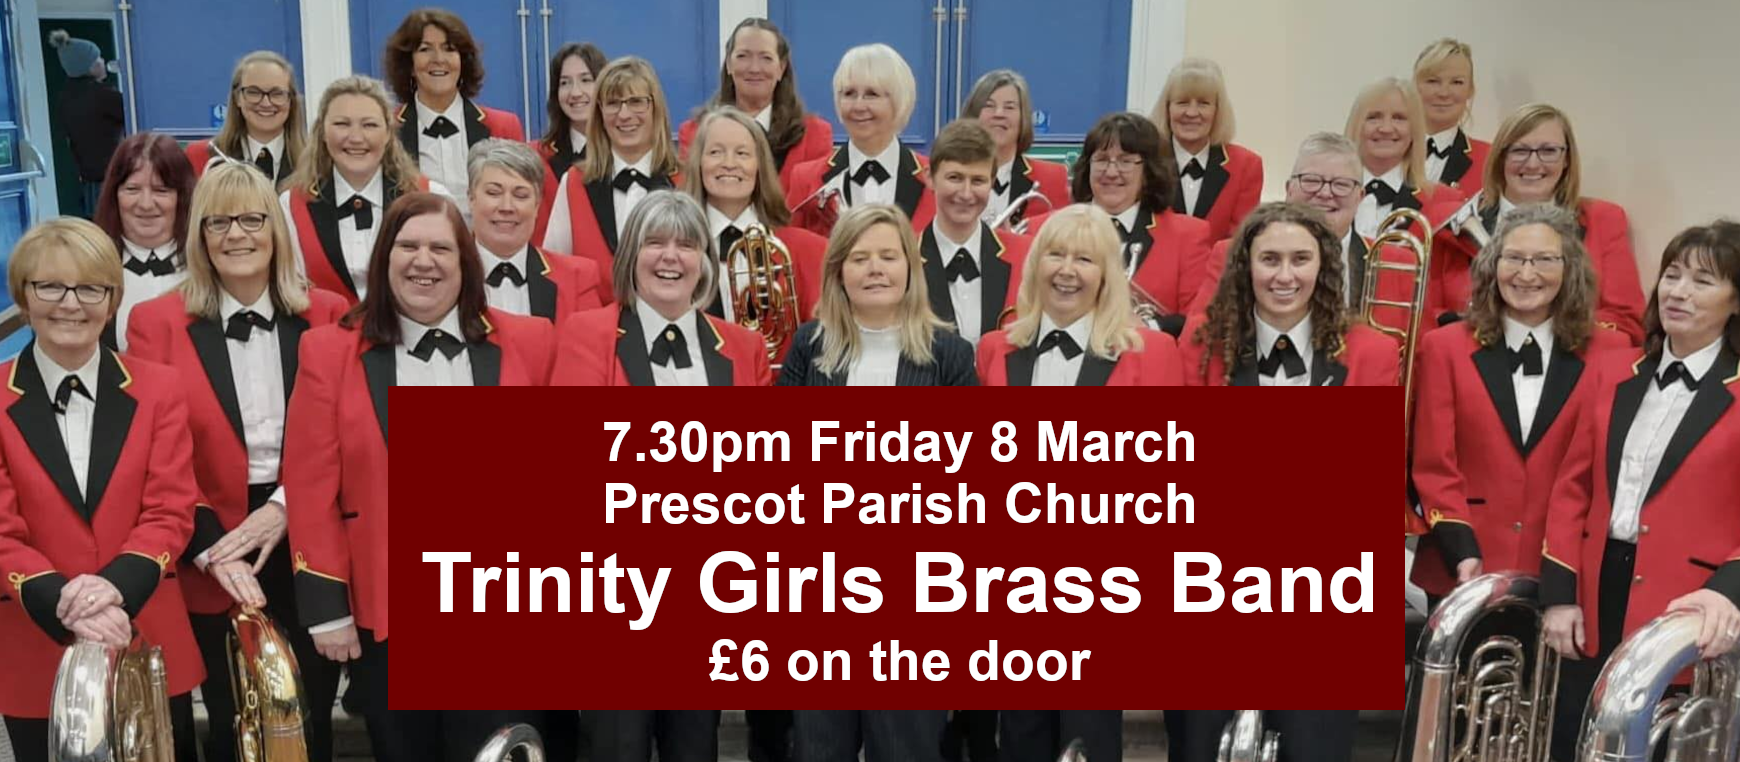 Trinity Girls Brass Band in Concert, 8 March